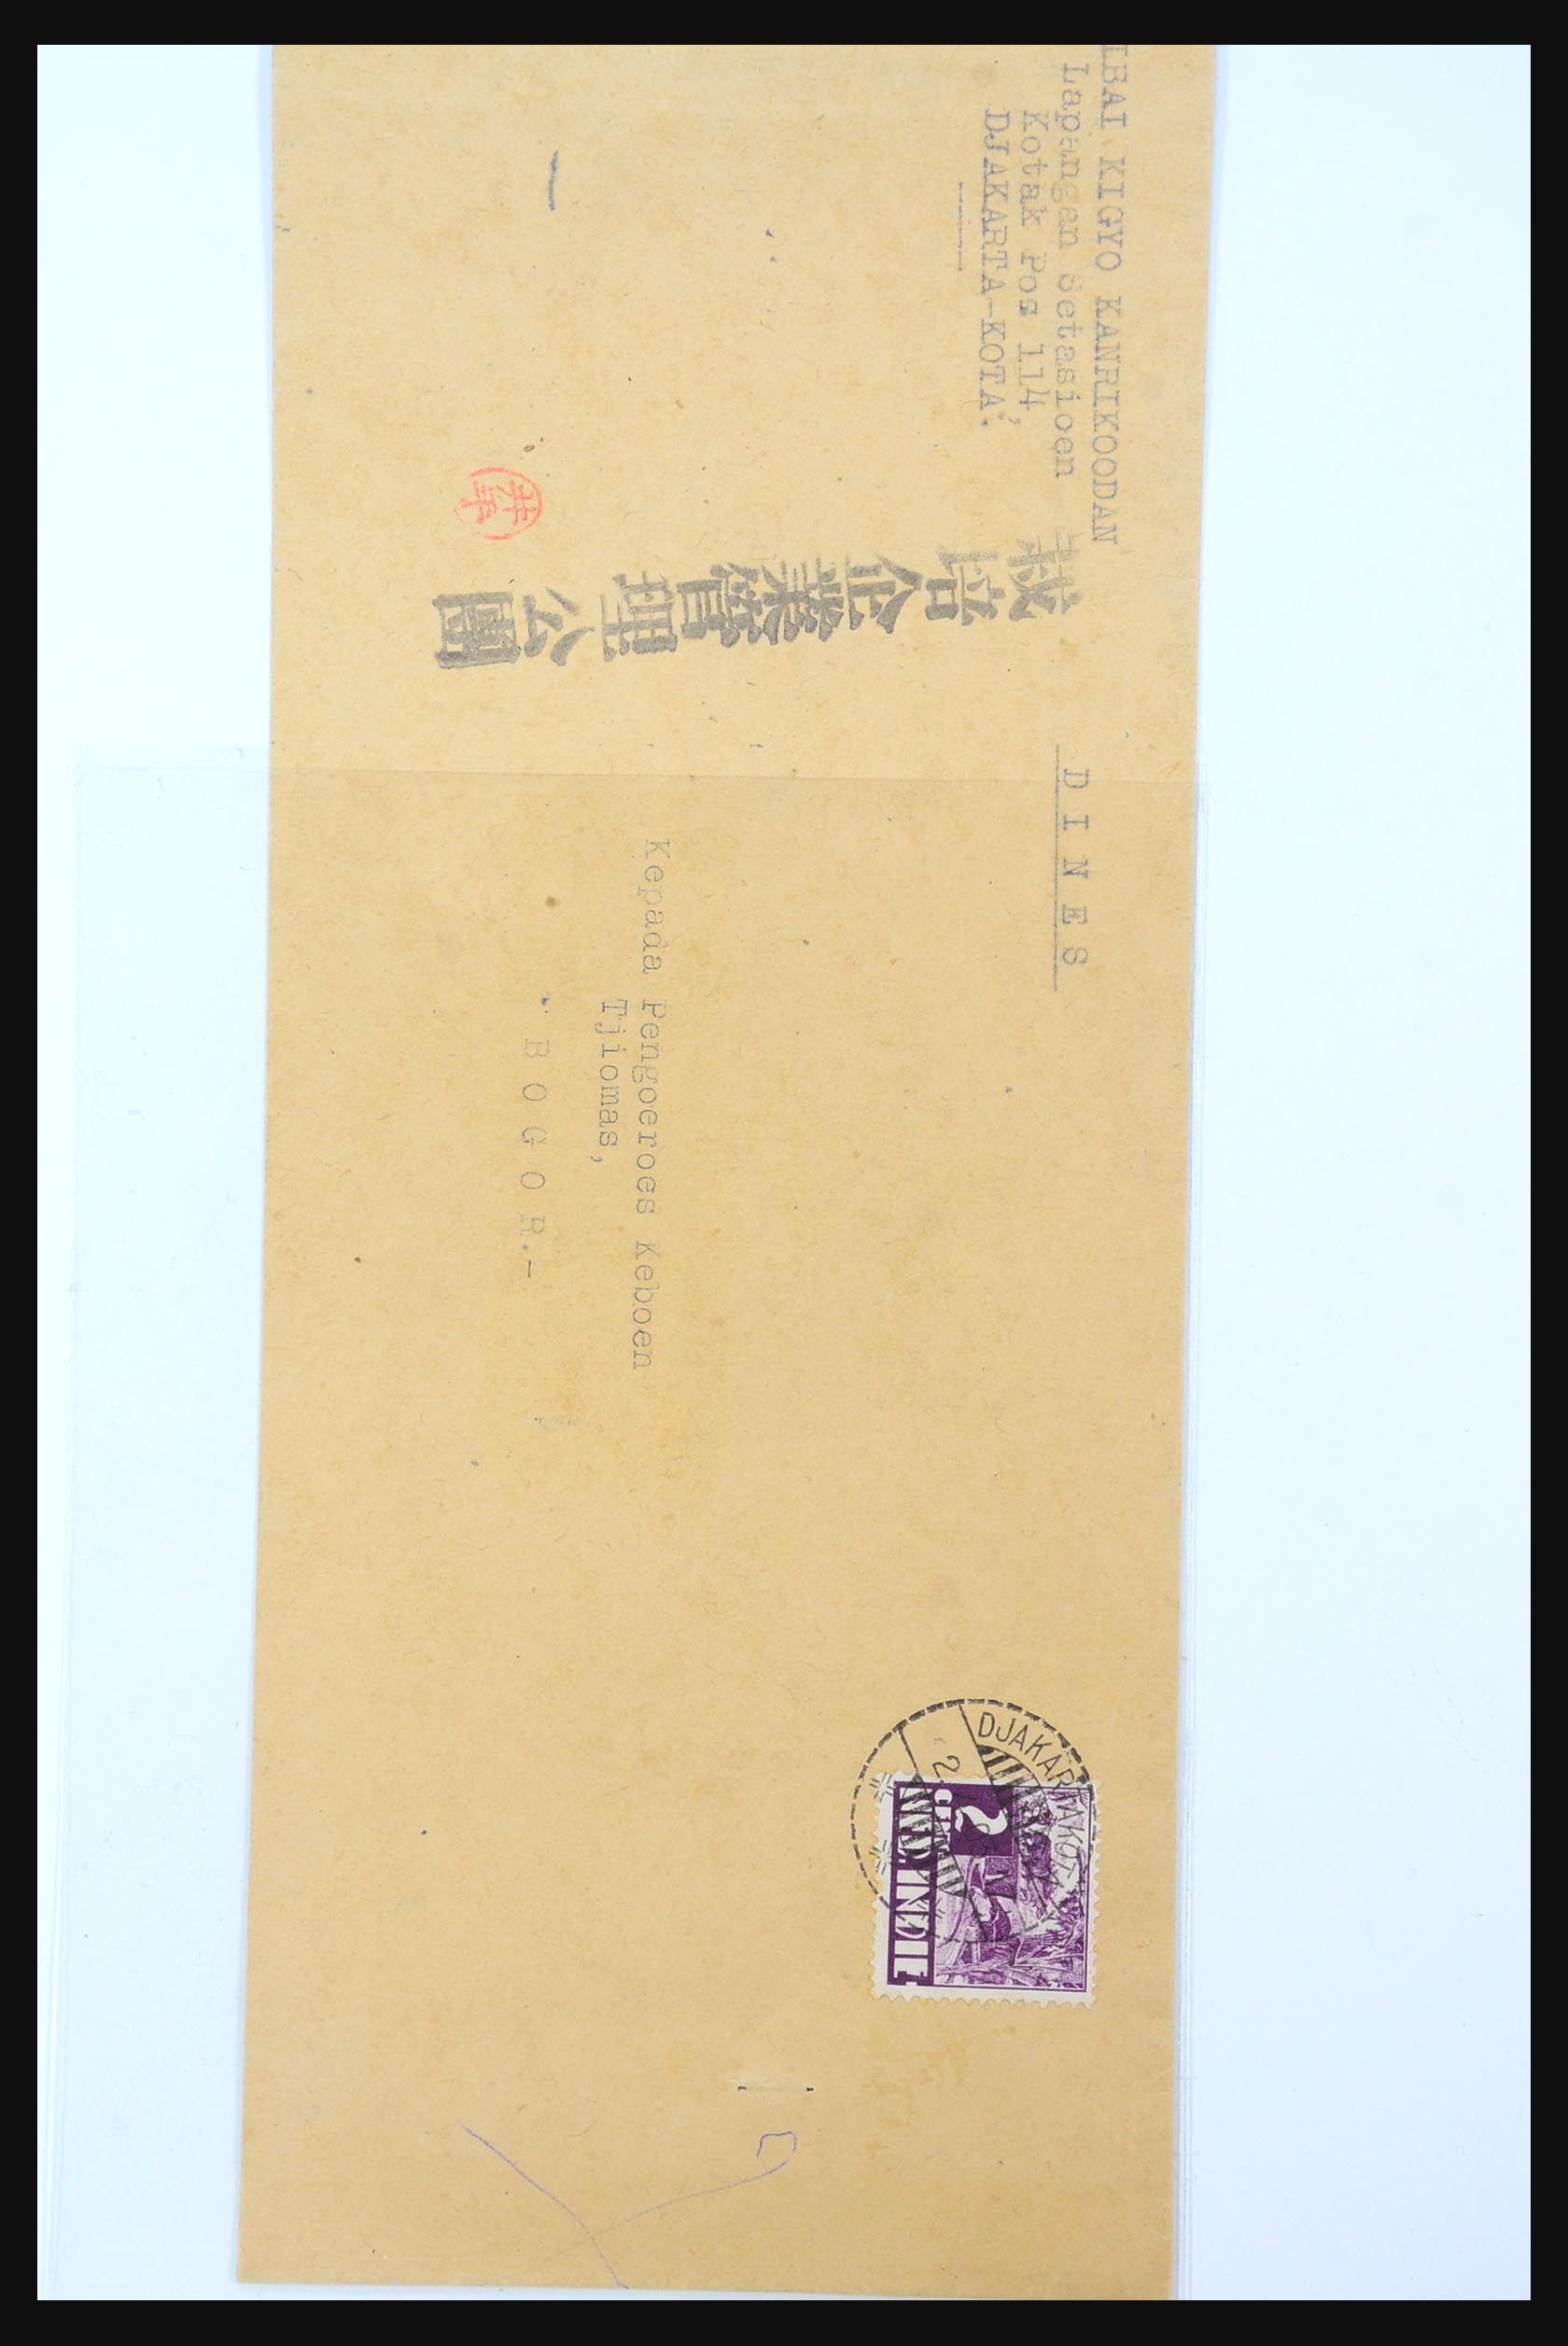 31362 066 - 31362 Netherlands Indies Japanese occupation covers 1942-1945.